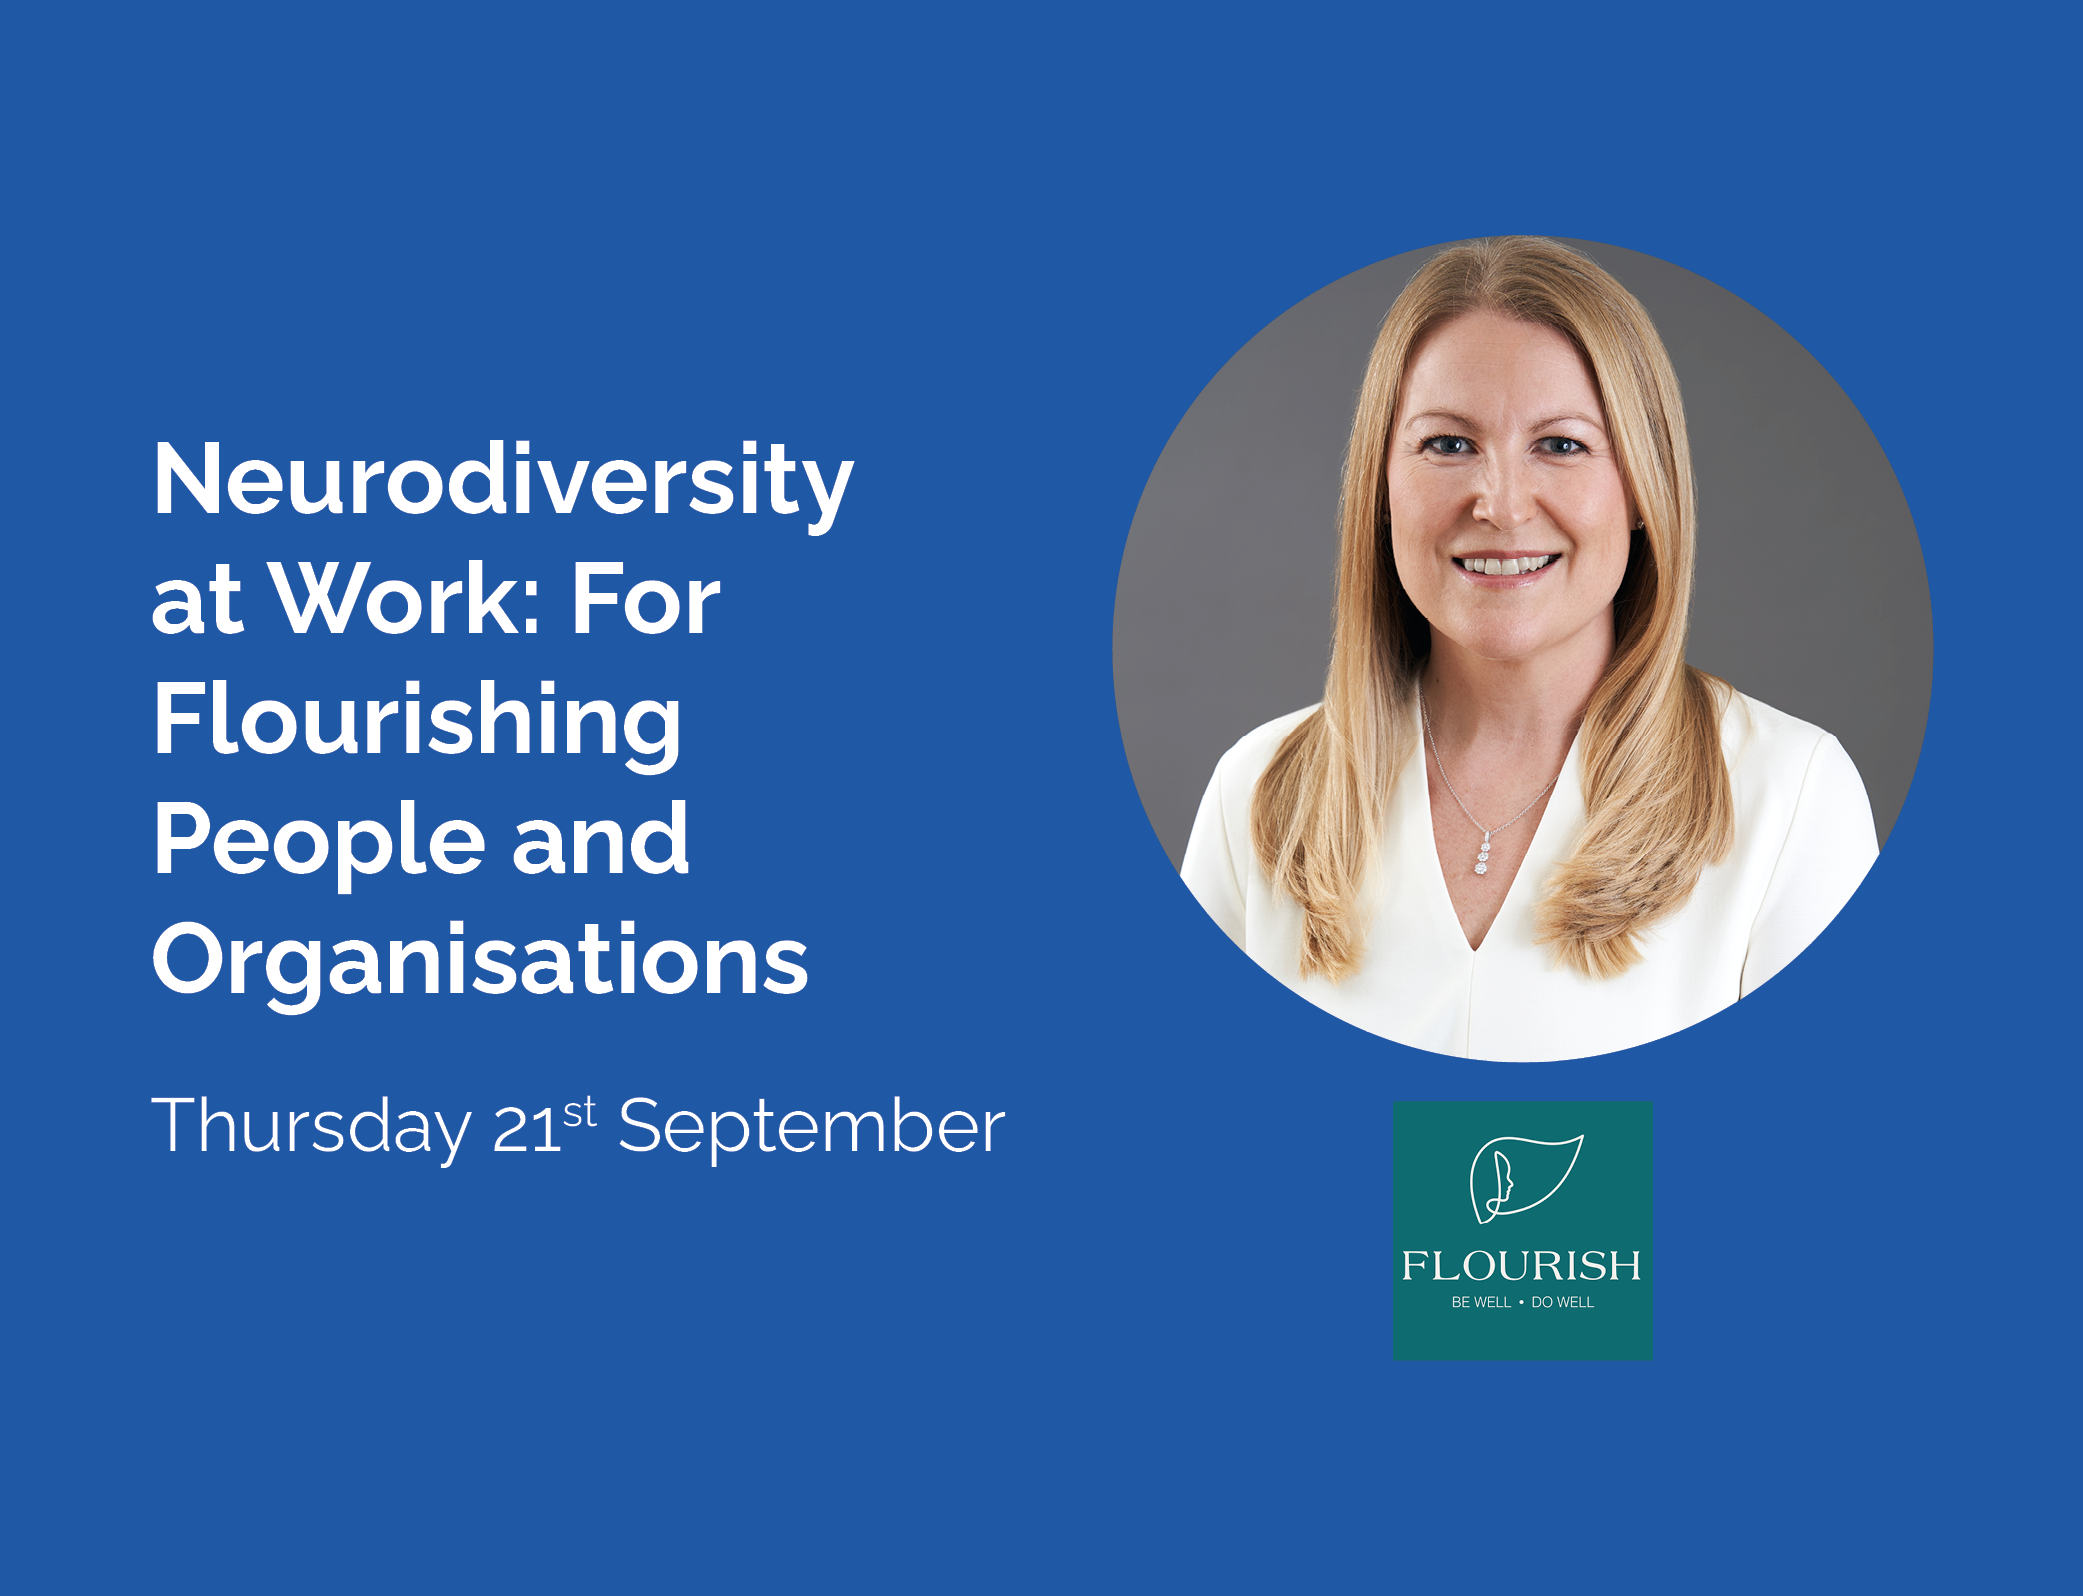 Neurodiversity at Work: For Flourishing People and Organisations